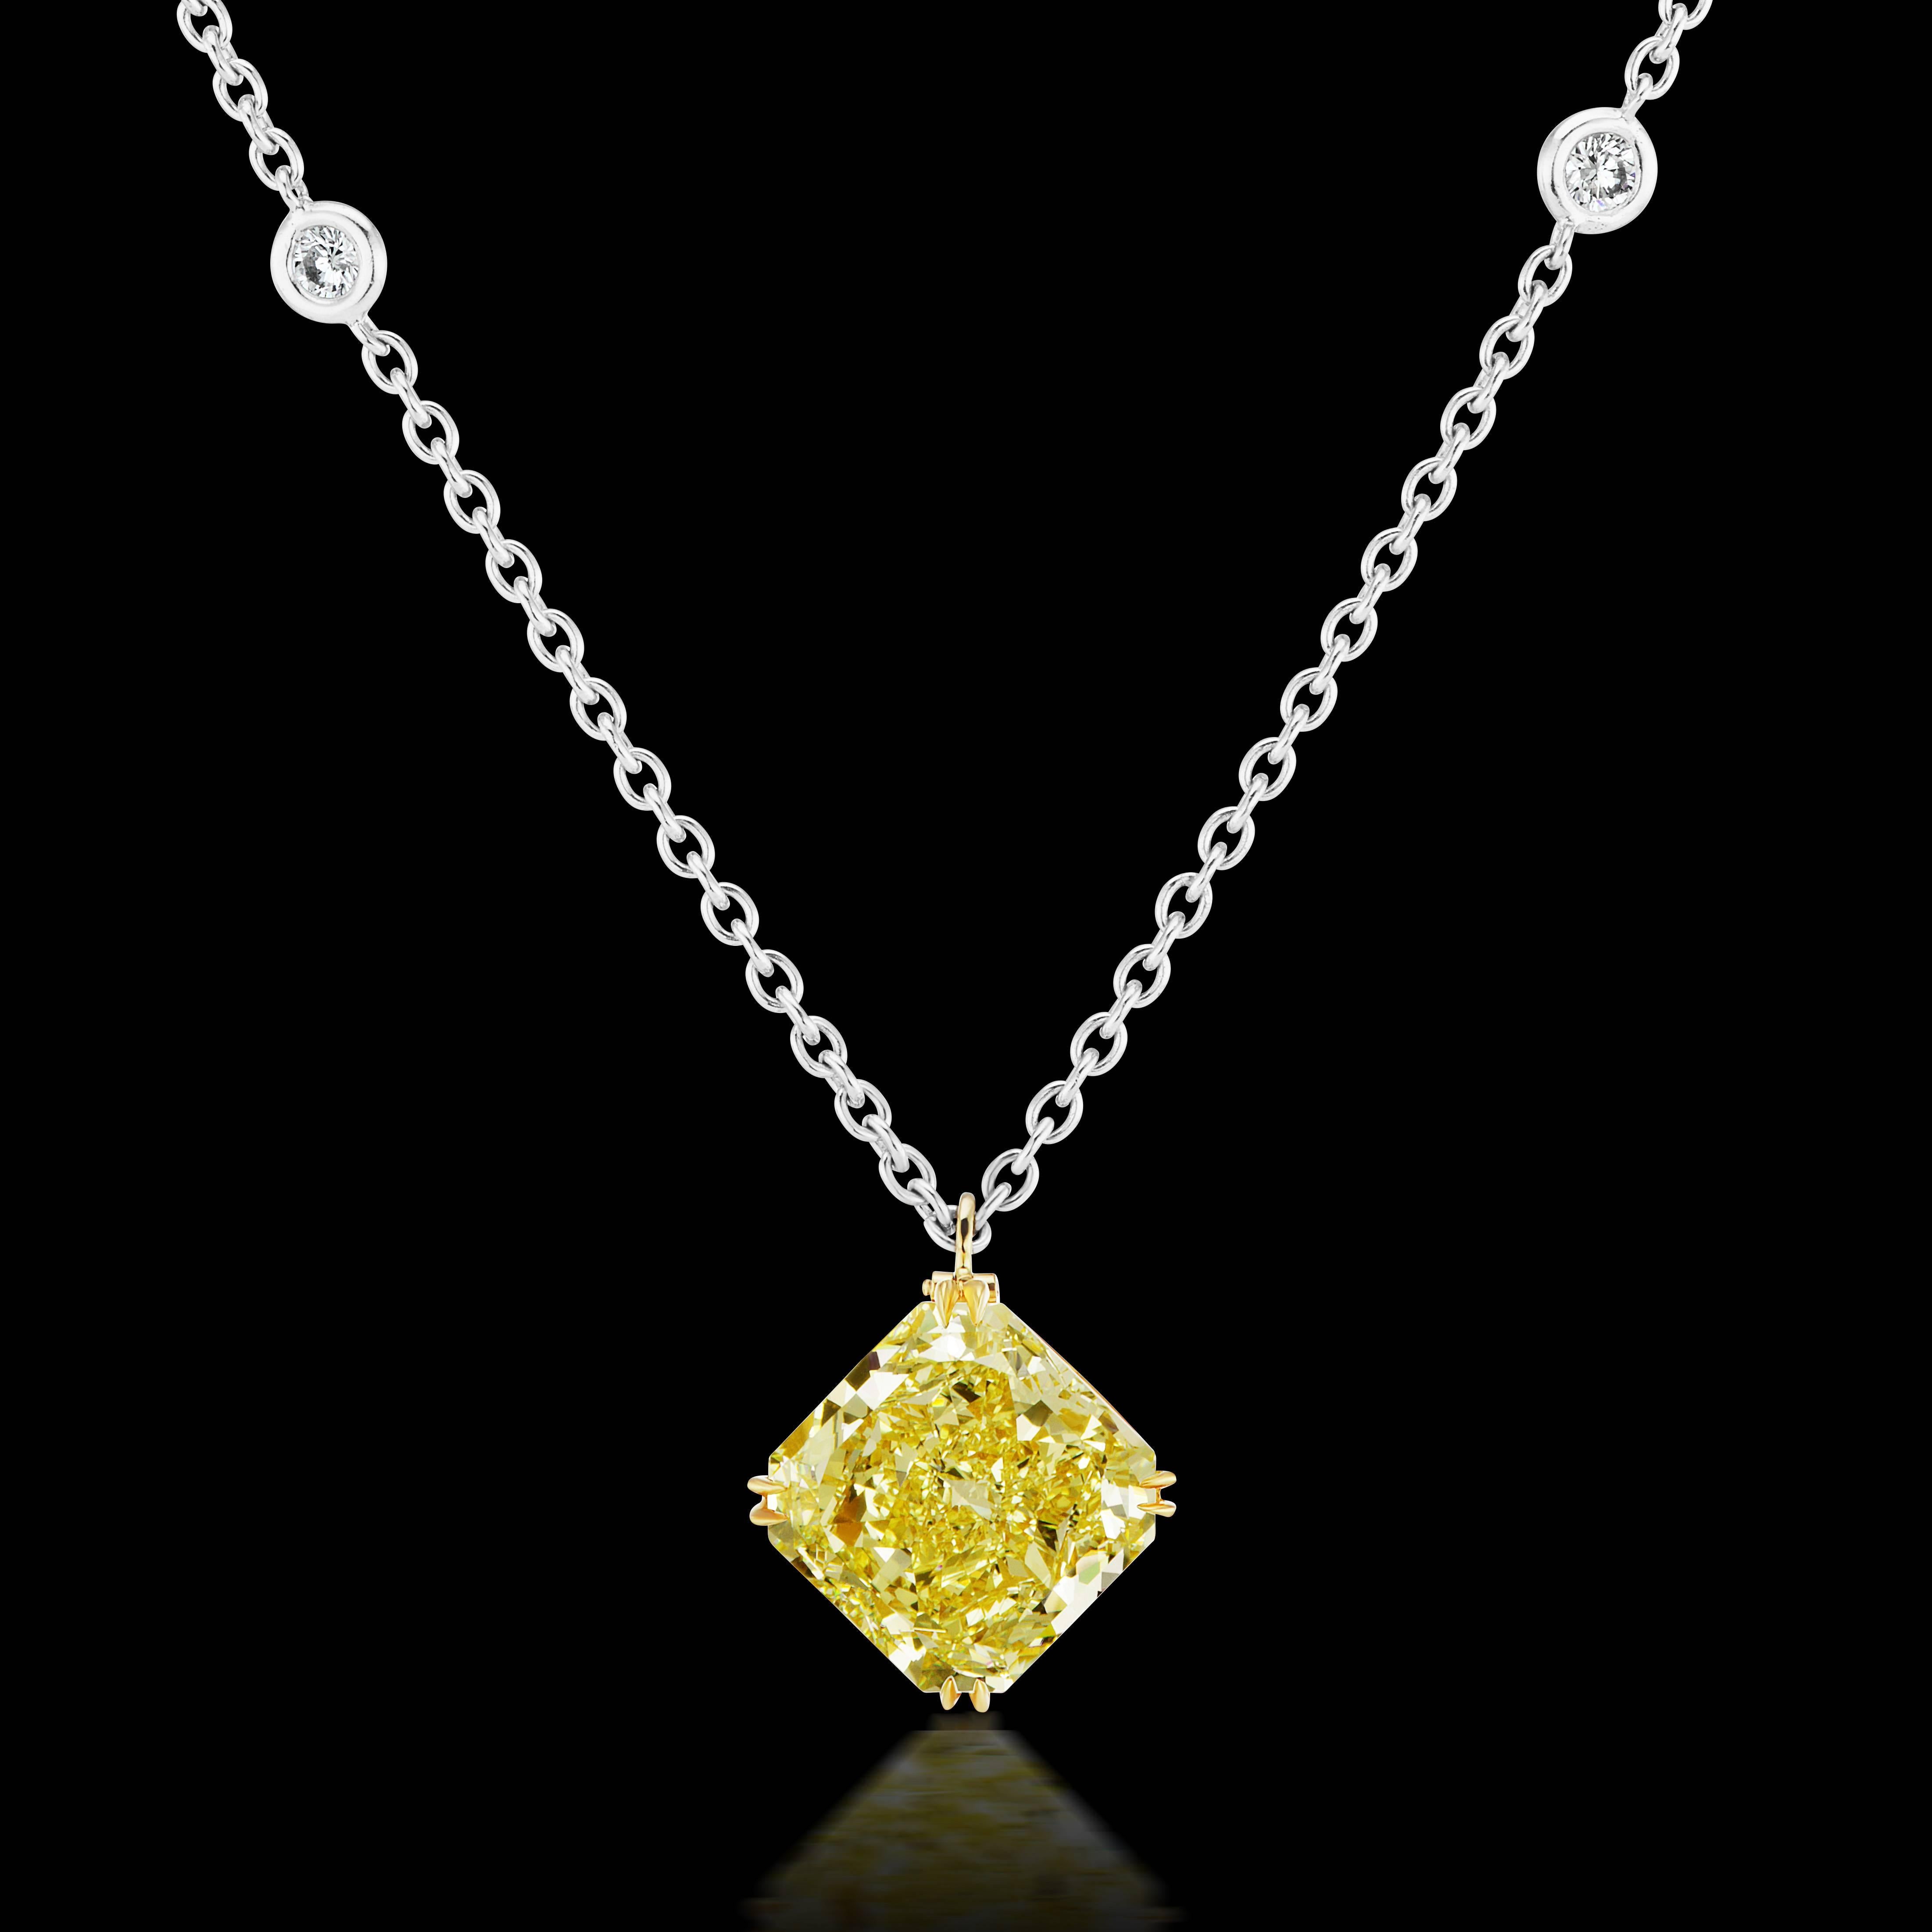 The ultimate wearable luxury, this 8.09 carat Fancy Yellow Radiant Cut Diamond VVS1 Clarity set in 18 karat yellow gold and suspended from an 18 karat white gold station chain with small white diamonds totaling .20 carat.  This spectacularly cut